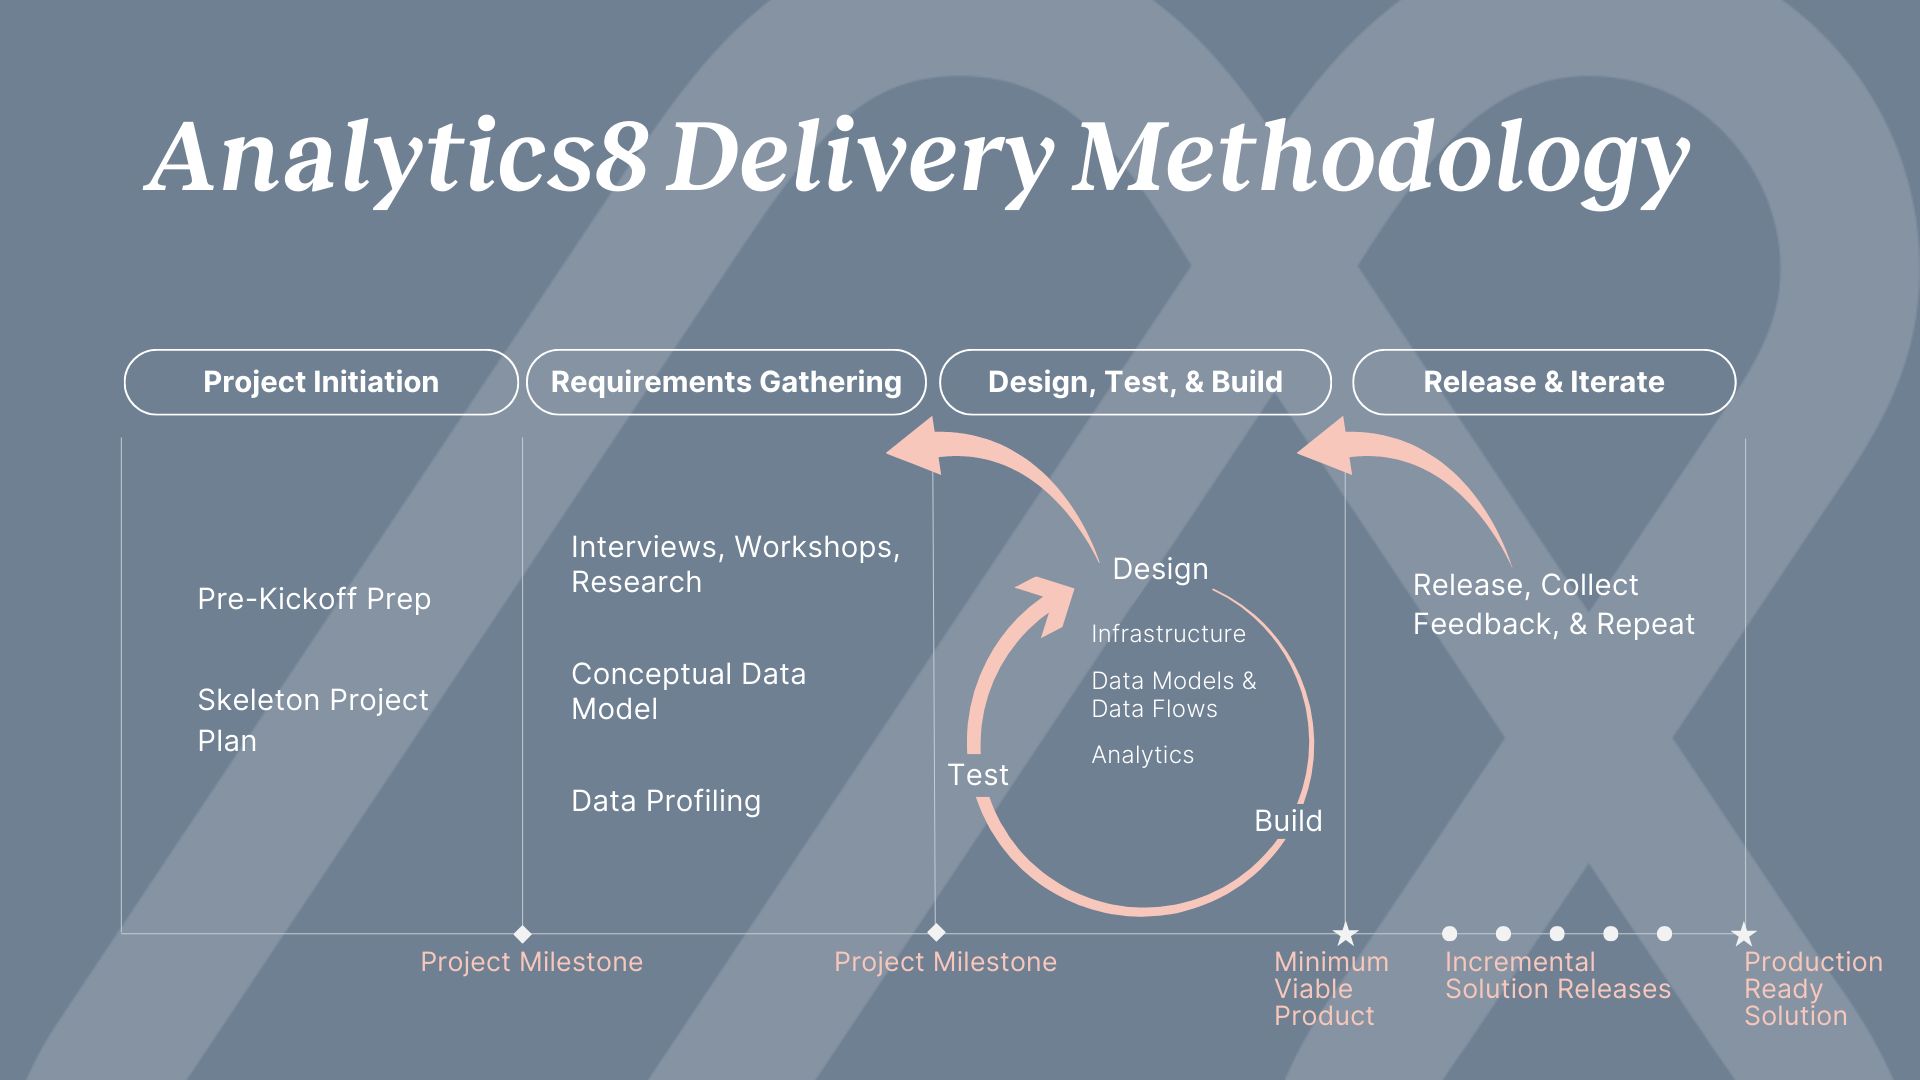 Illustration of the Analytics8 Delivery Methodology showing a cyclic process that begins with Project Initiation, followed by Requirements Gathering, then moving through Design, Test & Build stages, and ending with Release & Iterate for continuous improvement. The graphic highlights steps like Kick-off Prep, Skeleton Project Plan, interviews, workshops, conceptual data model, data profiling, infrastructure & analytics design, and a focus on incremental delivery for effective analytical and data analytics methodologies.